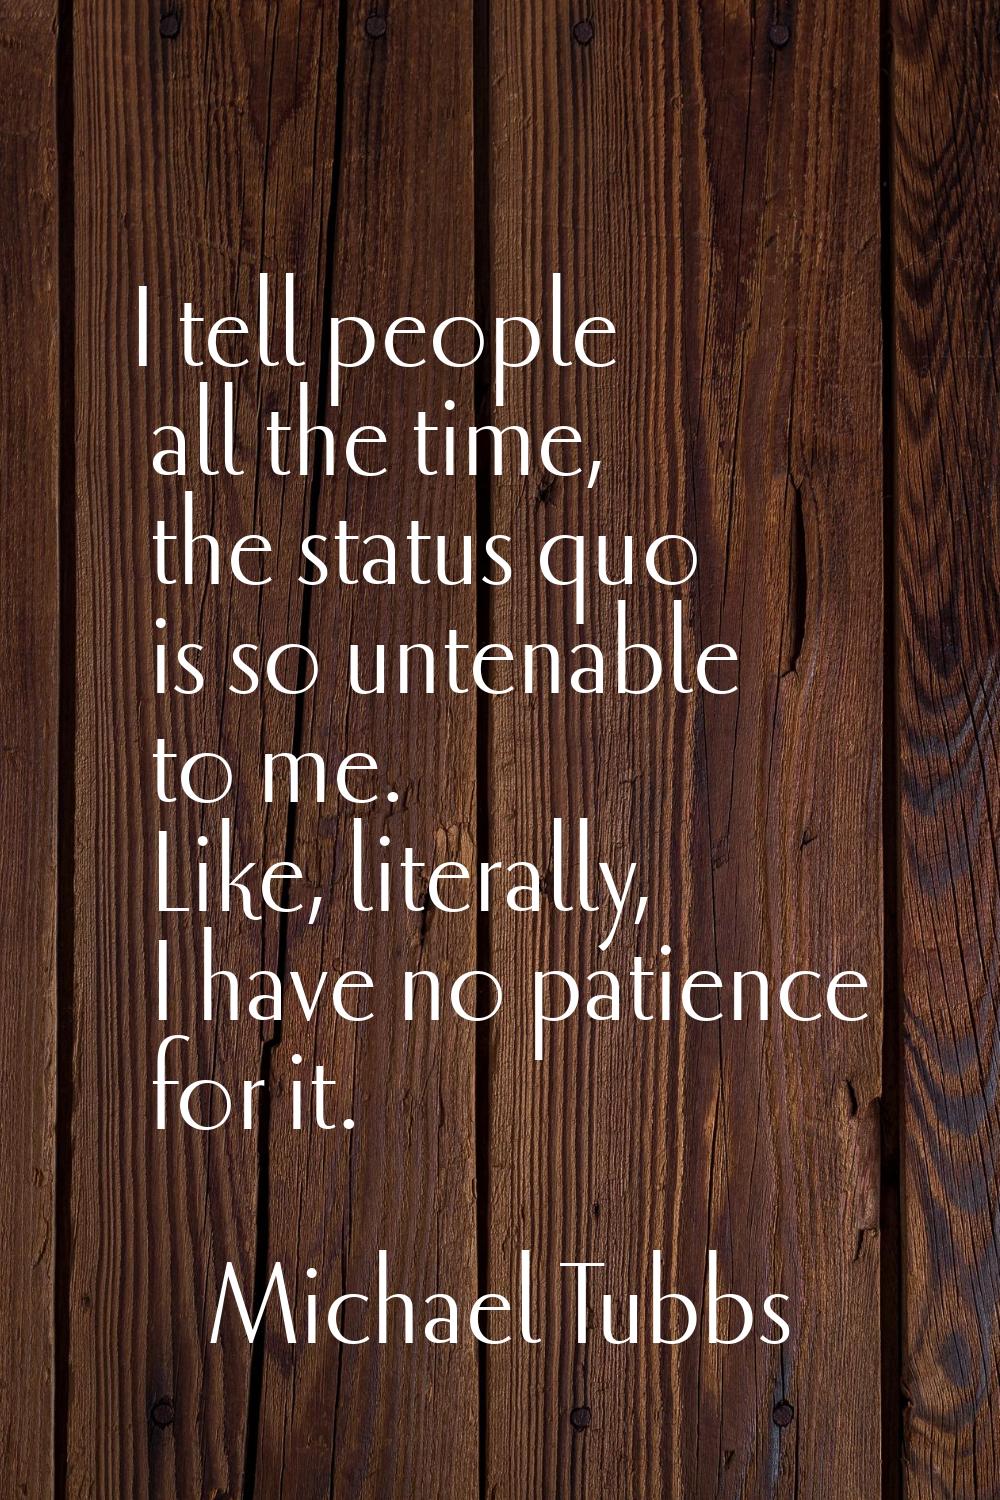 I tell people all the time, the status quo is so untenable to me. Like, literally, I have no patien